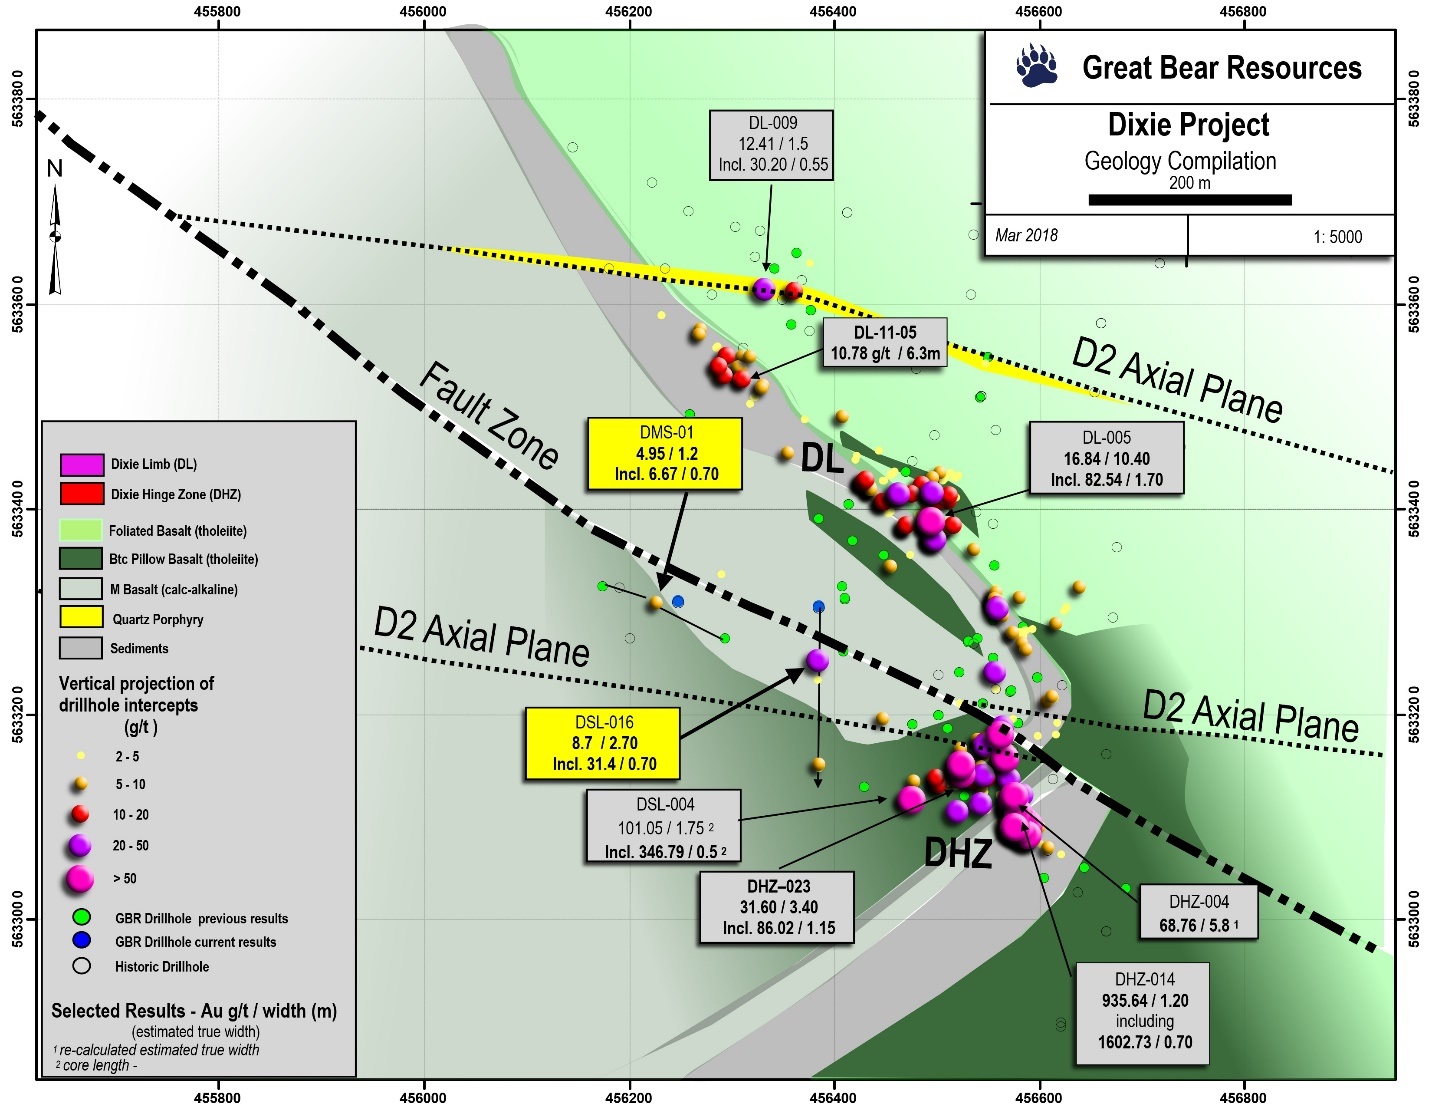 Great bear Resources GBR 4